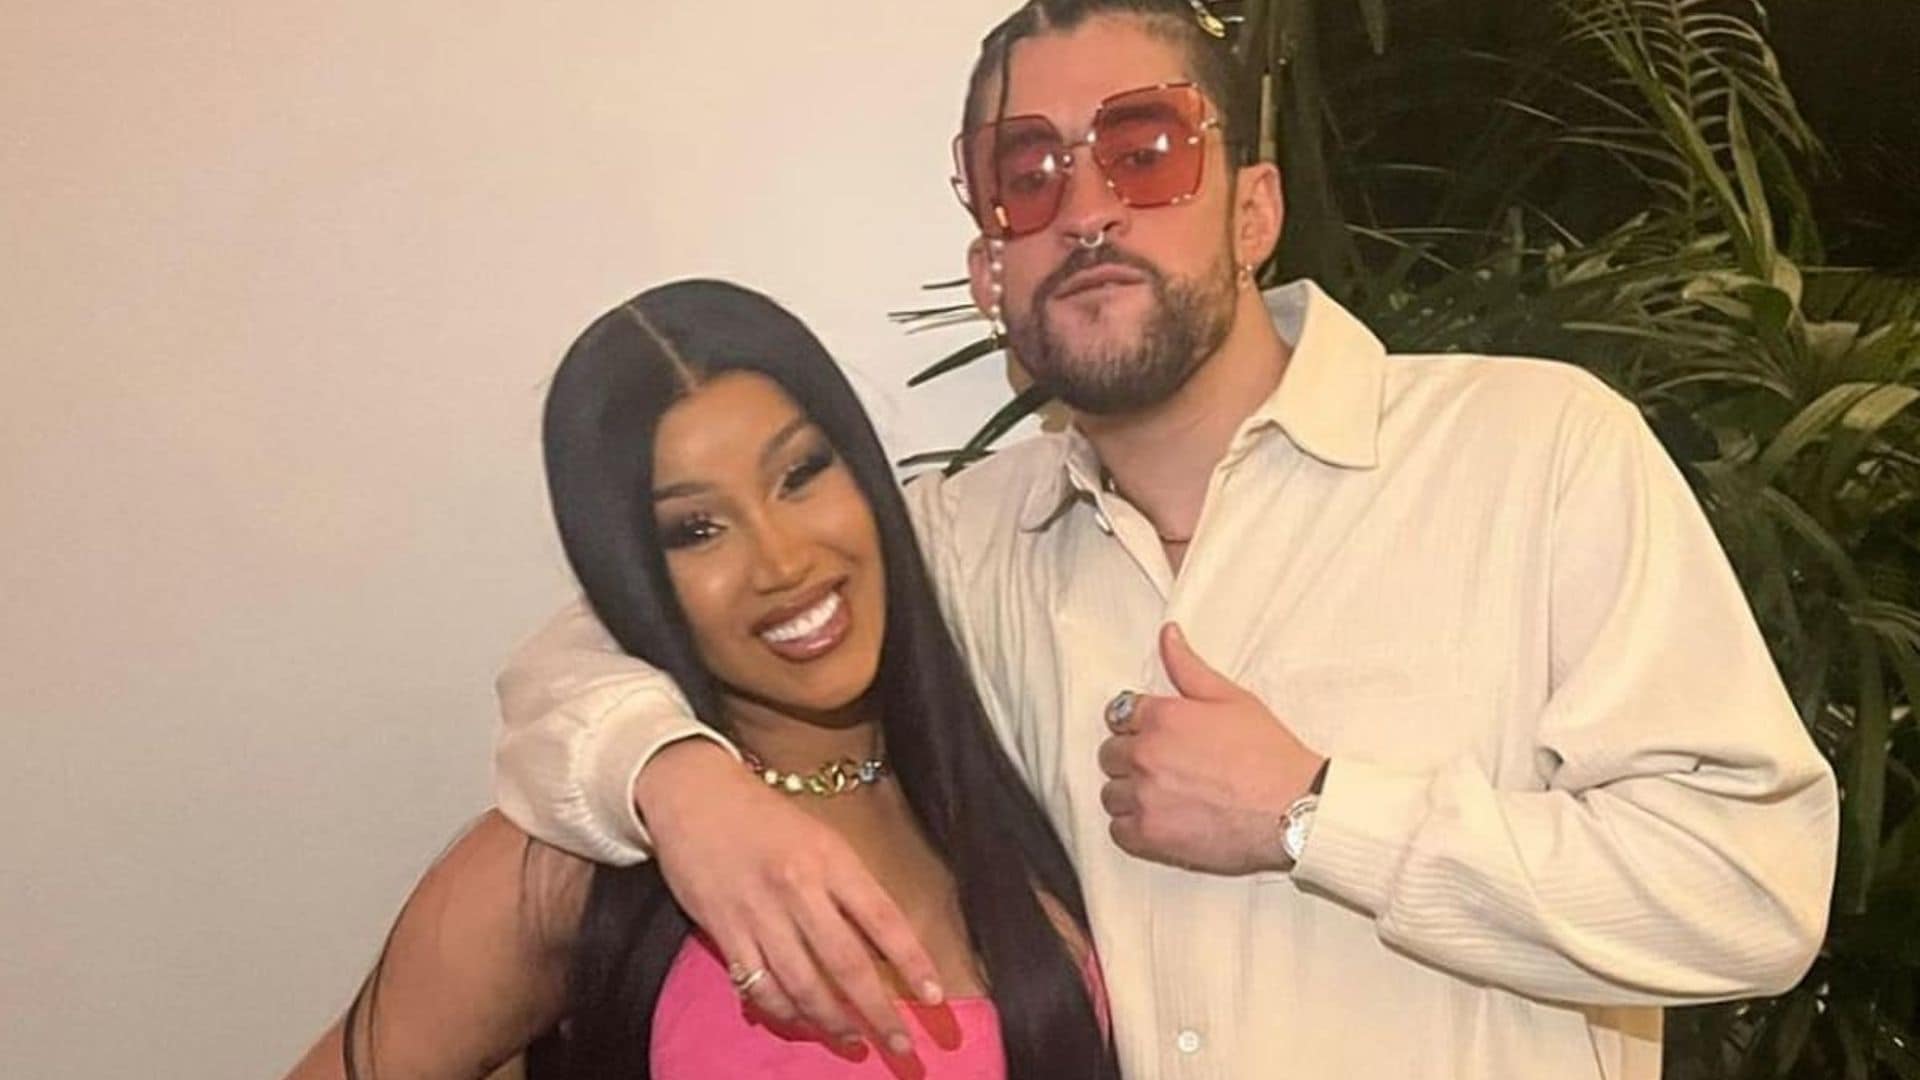 Bad Bunny and Cardi B shared special moment during surprise performance in Los Angeles